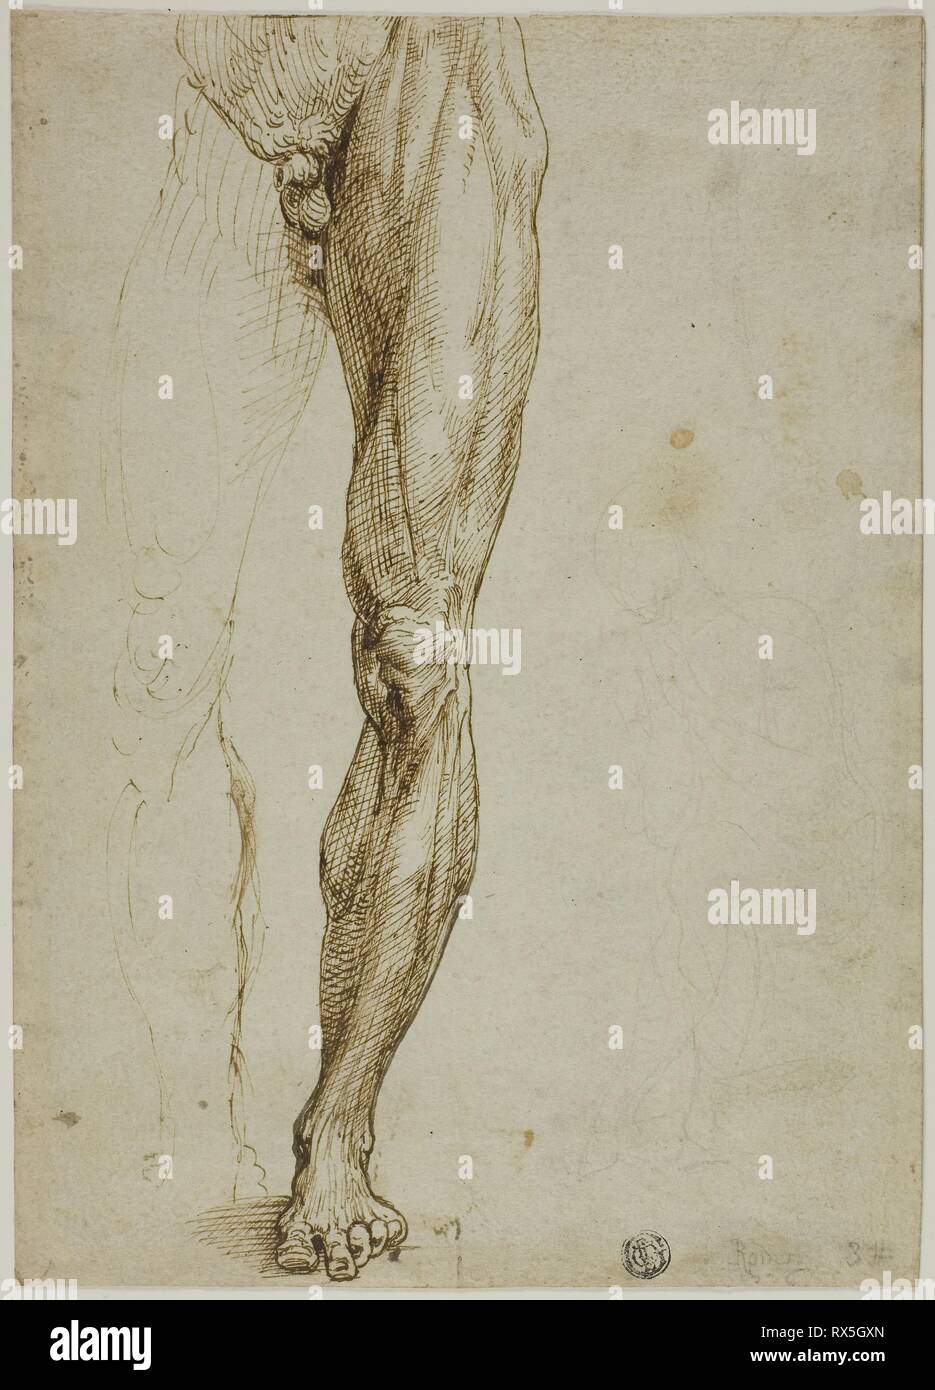 Male Figure Study, with Slight Sketch of Seated Figure. Follower of Michelangelo Buonarroti; Italian, 1475-1564. Date: 1540-1550. Dimensions: 269 x 191 mm (max.). Pen and brown ink, with traces of black chalk, on ivory laid paper. Origin: Italy. Museum: The Chicago Art Institute. Stock Photo